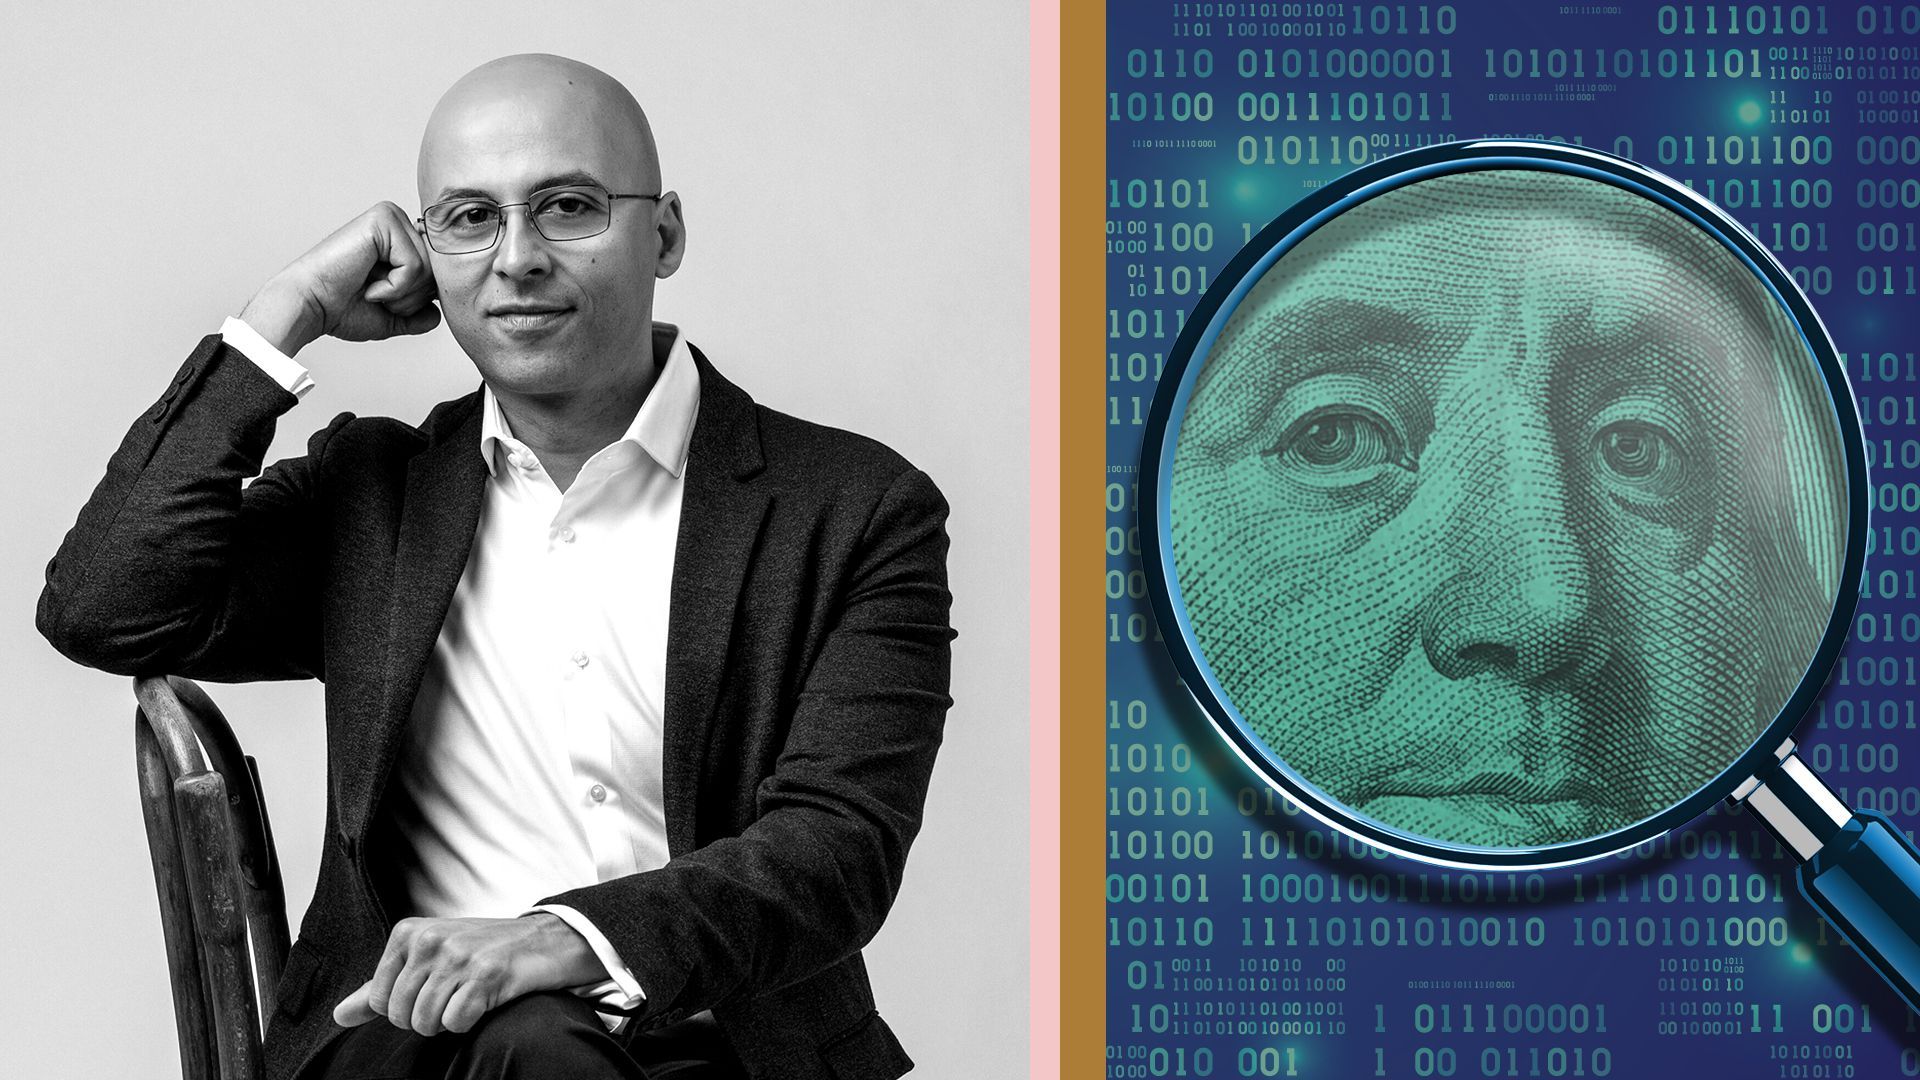 Photo illustration of Omid Malekan next to an image of a magnifying glass over a hundred dollar bill with binary code